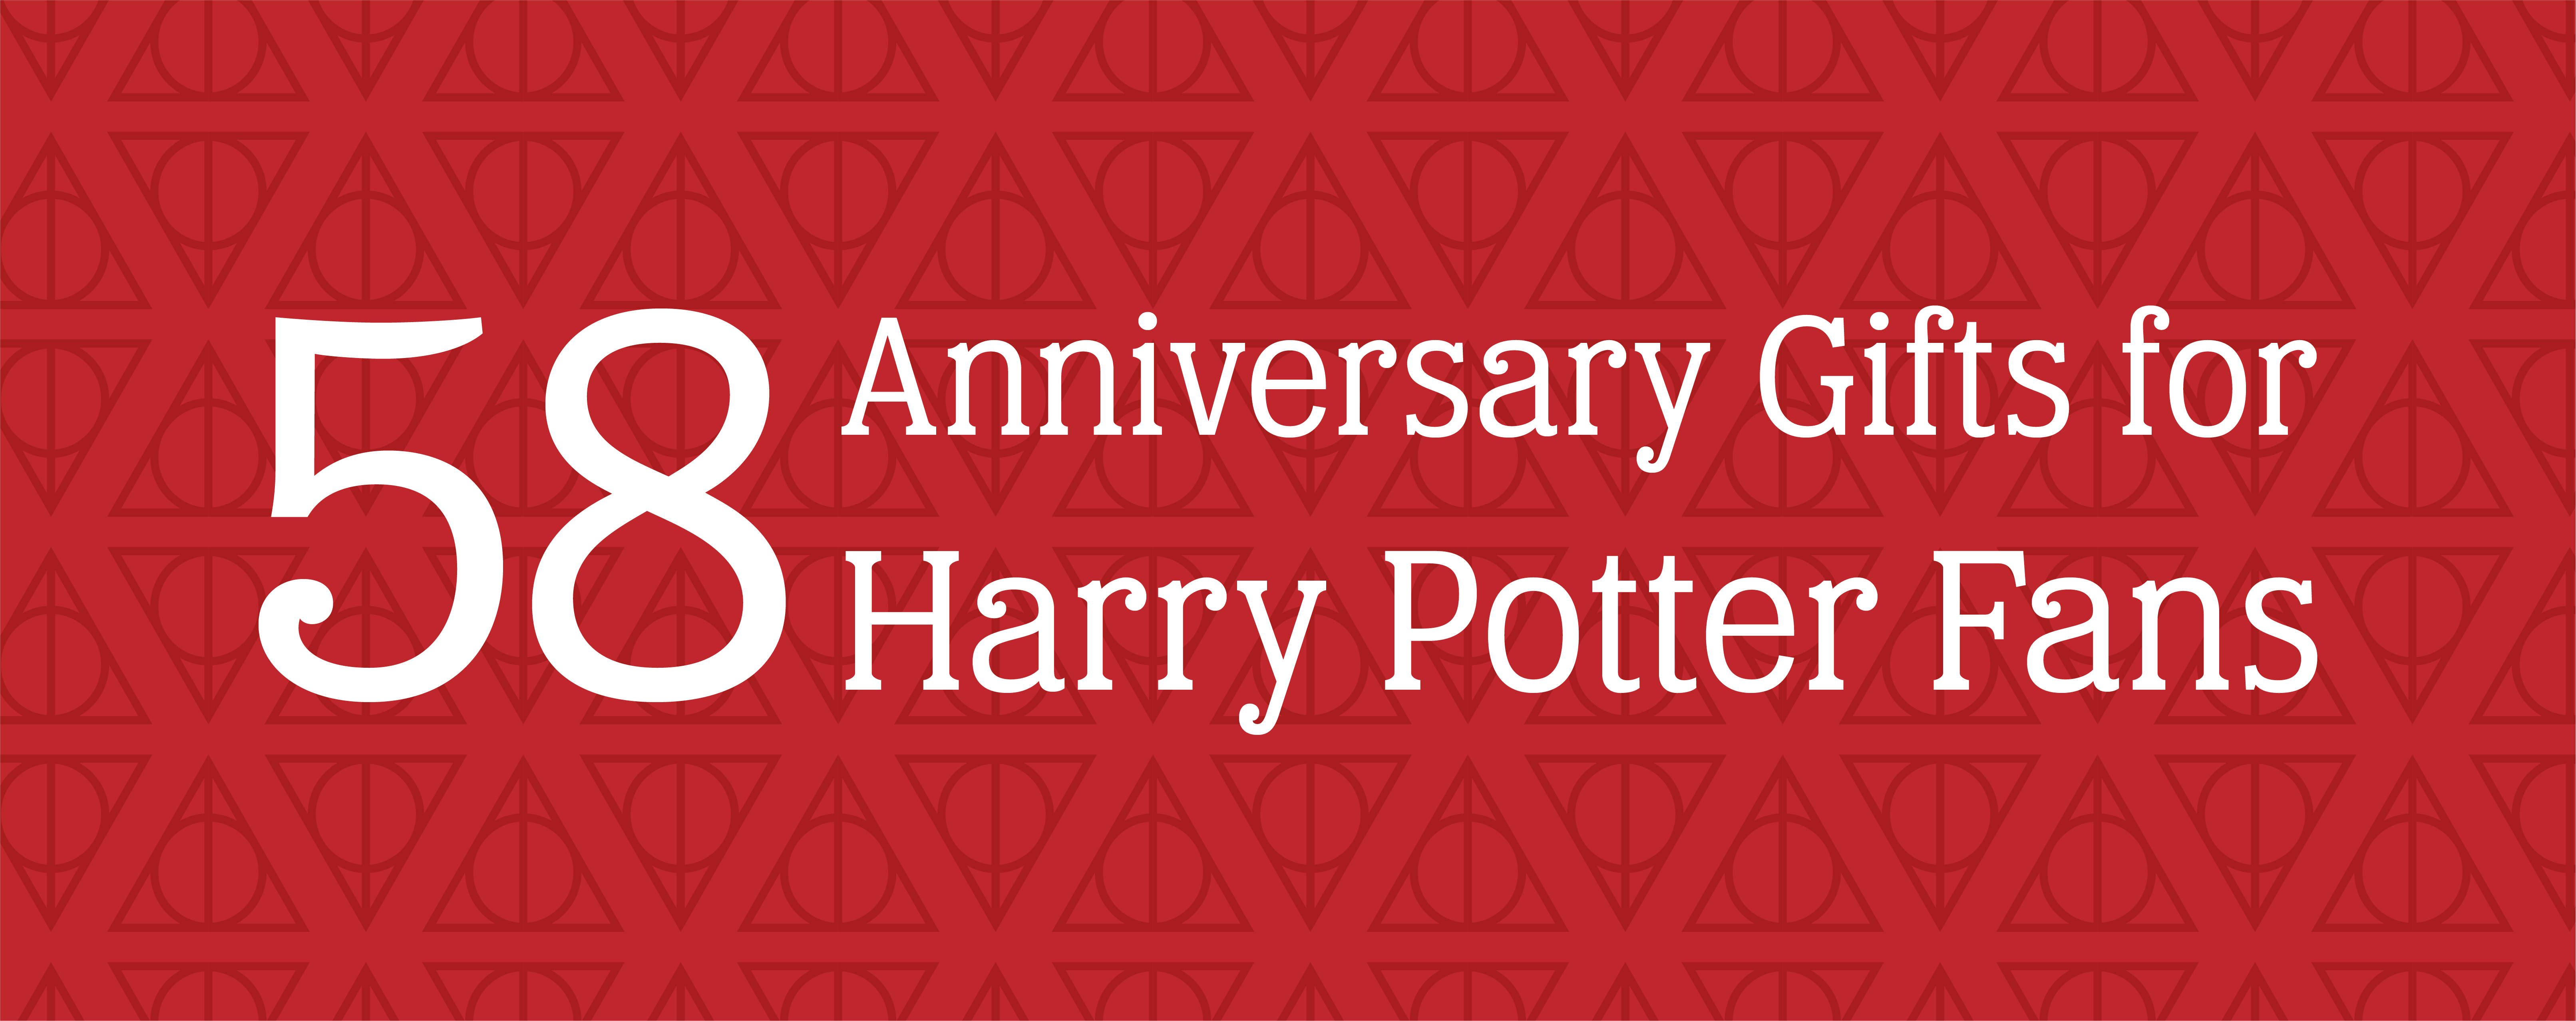 Deathly Hallows pattern on a red background with a white text overlay that reads "58 Anniversary Gifts for Harry Potter Fans"